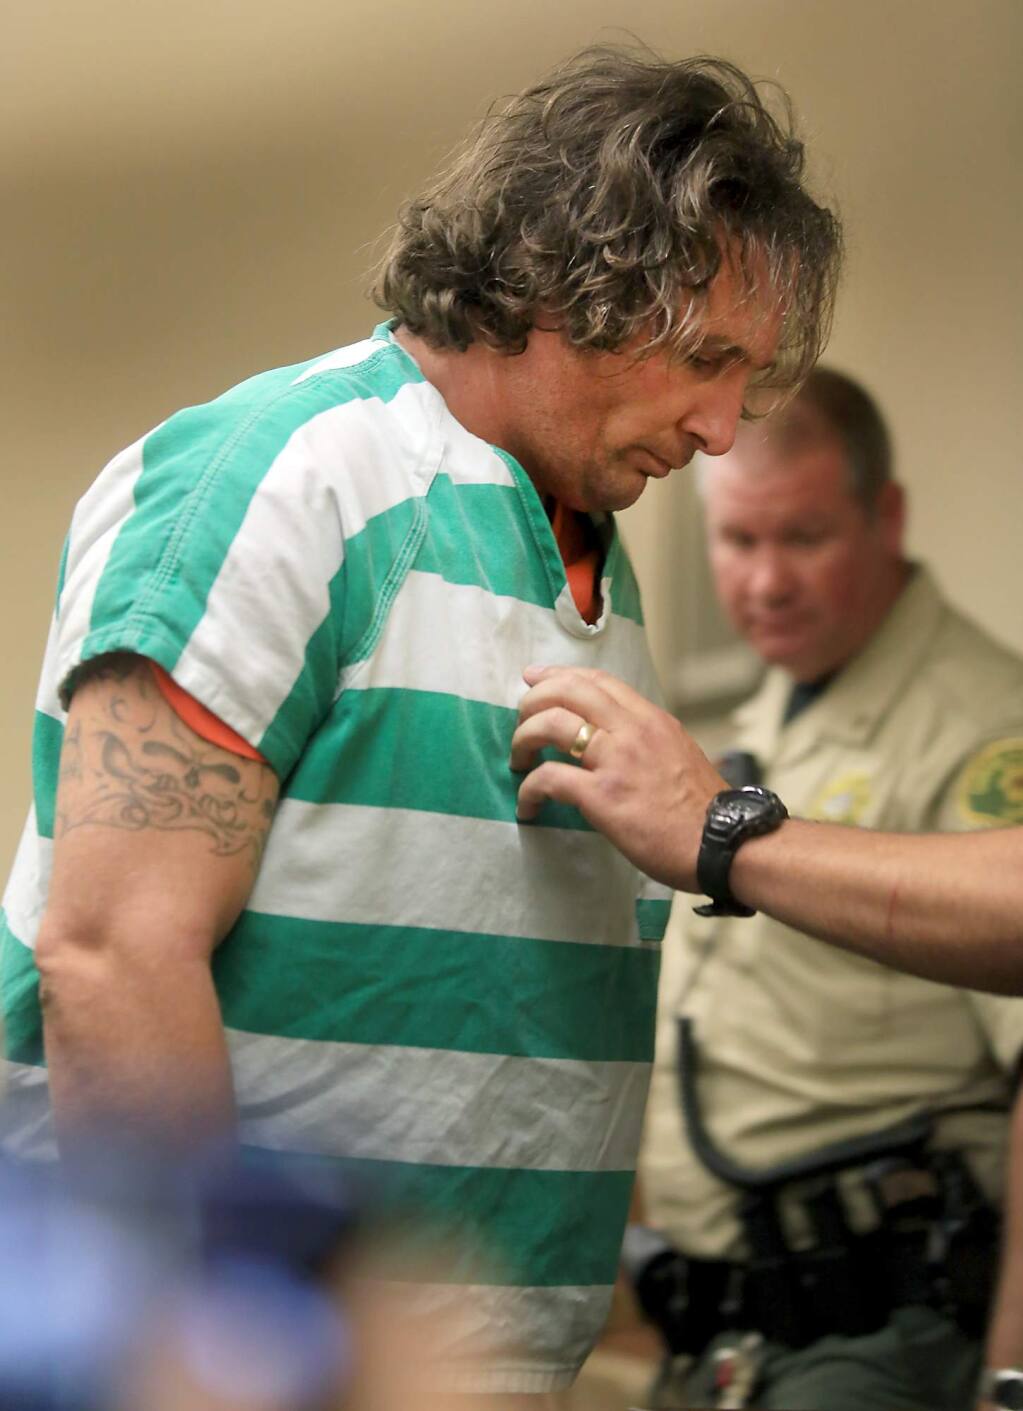 Damin Pashilk, 40, is taken from Lake County Superior Court, Wednesday August 17, 2016 after facing charges of arson in setting the Clayton fire in Lower Lake in Lake County. He did not enter a plea and the case was set over until September. Pashilk is resident of Lake County and faces numerous counts of arson dating back to 2015. (Kent Porter / Press Democrat) 2016